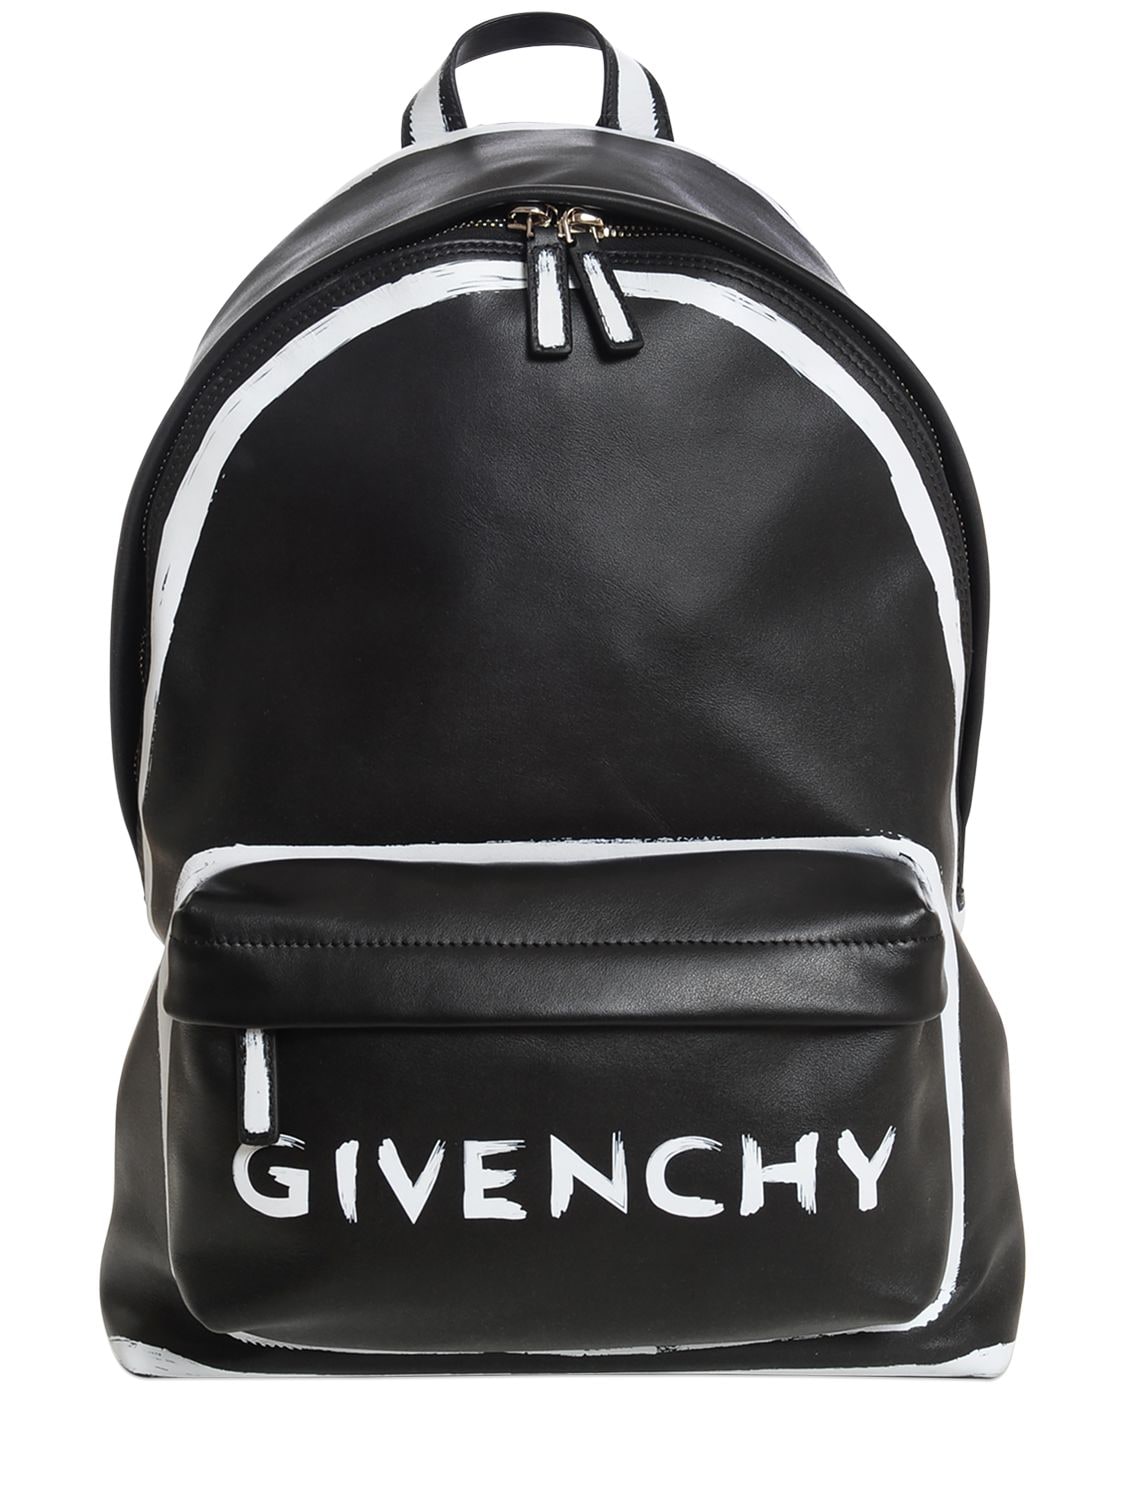 GIVENCHY SMALL PAINTED LOGO LEATHER BACKPACK,67IA5P019-MDAx0